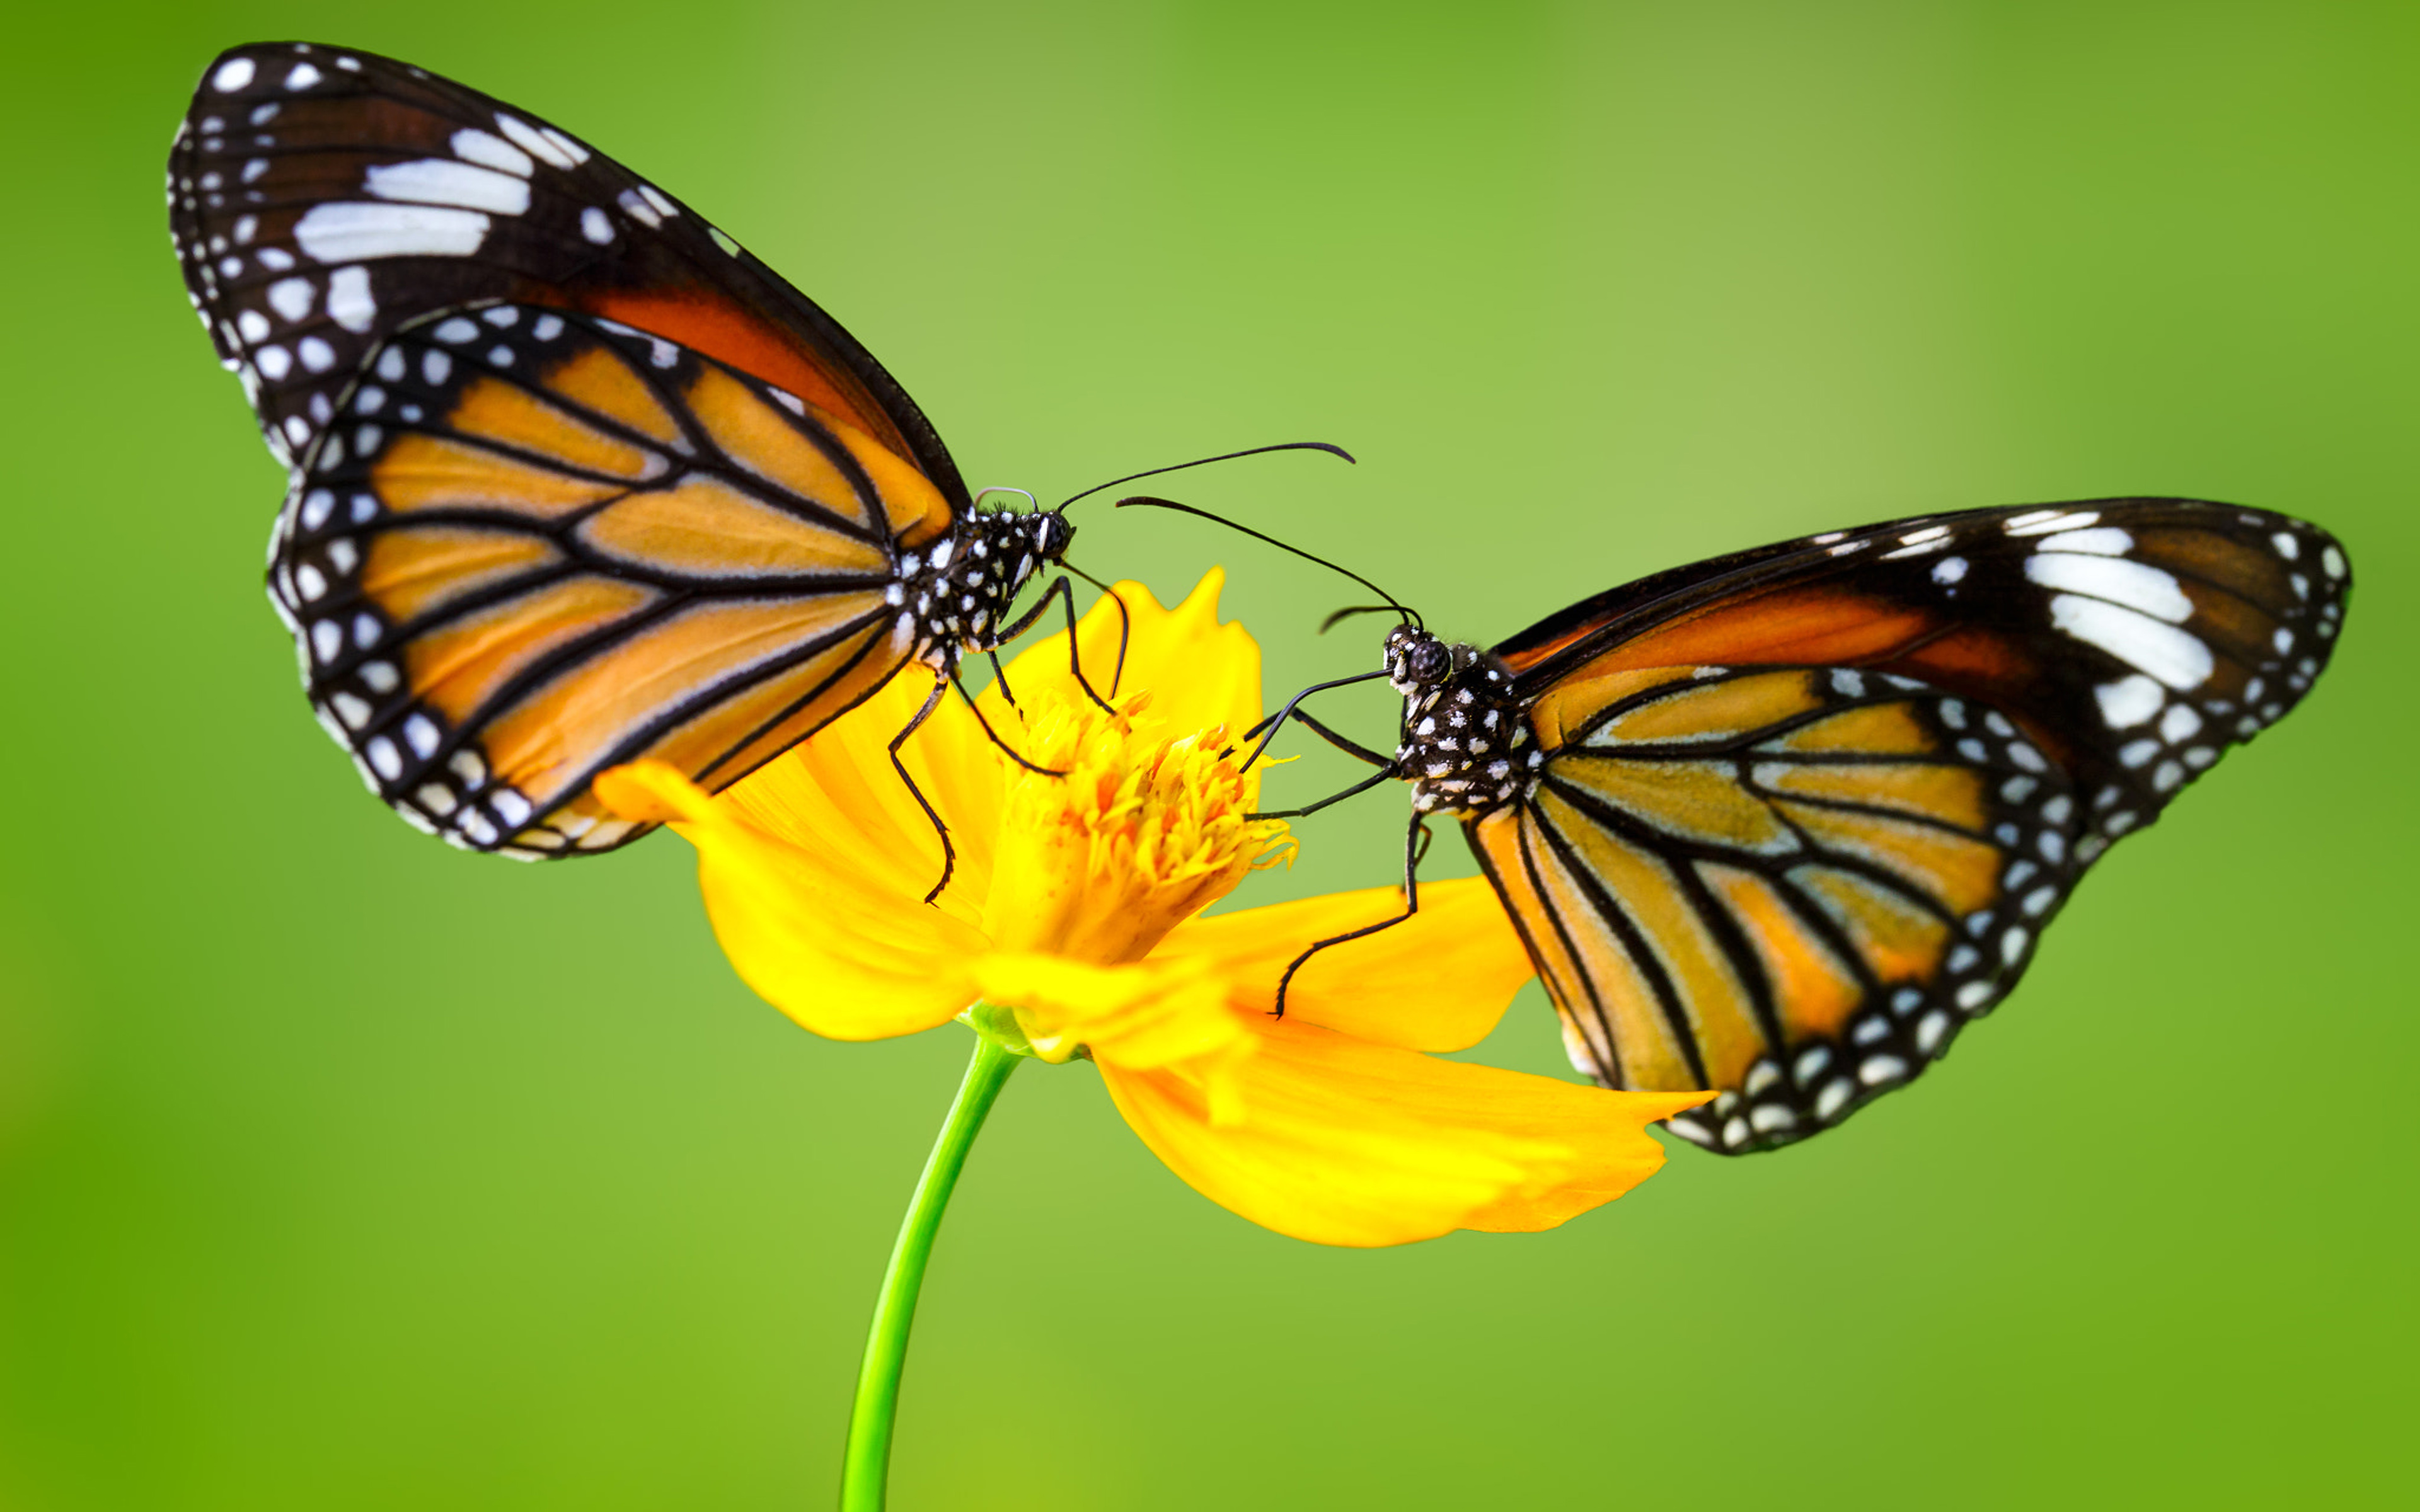 Insect Monarch Butterflys On Yellow Flower 4k Ultra Hd ...